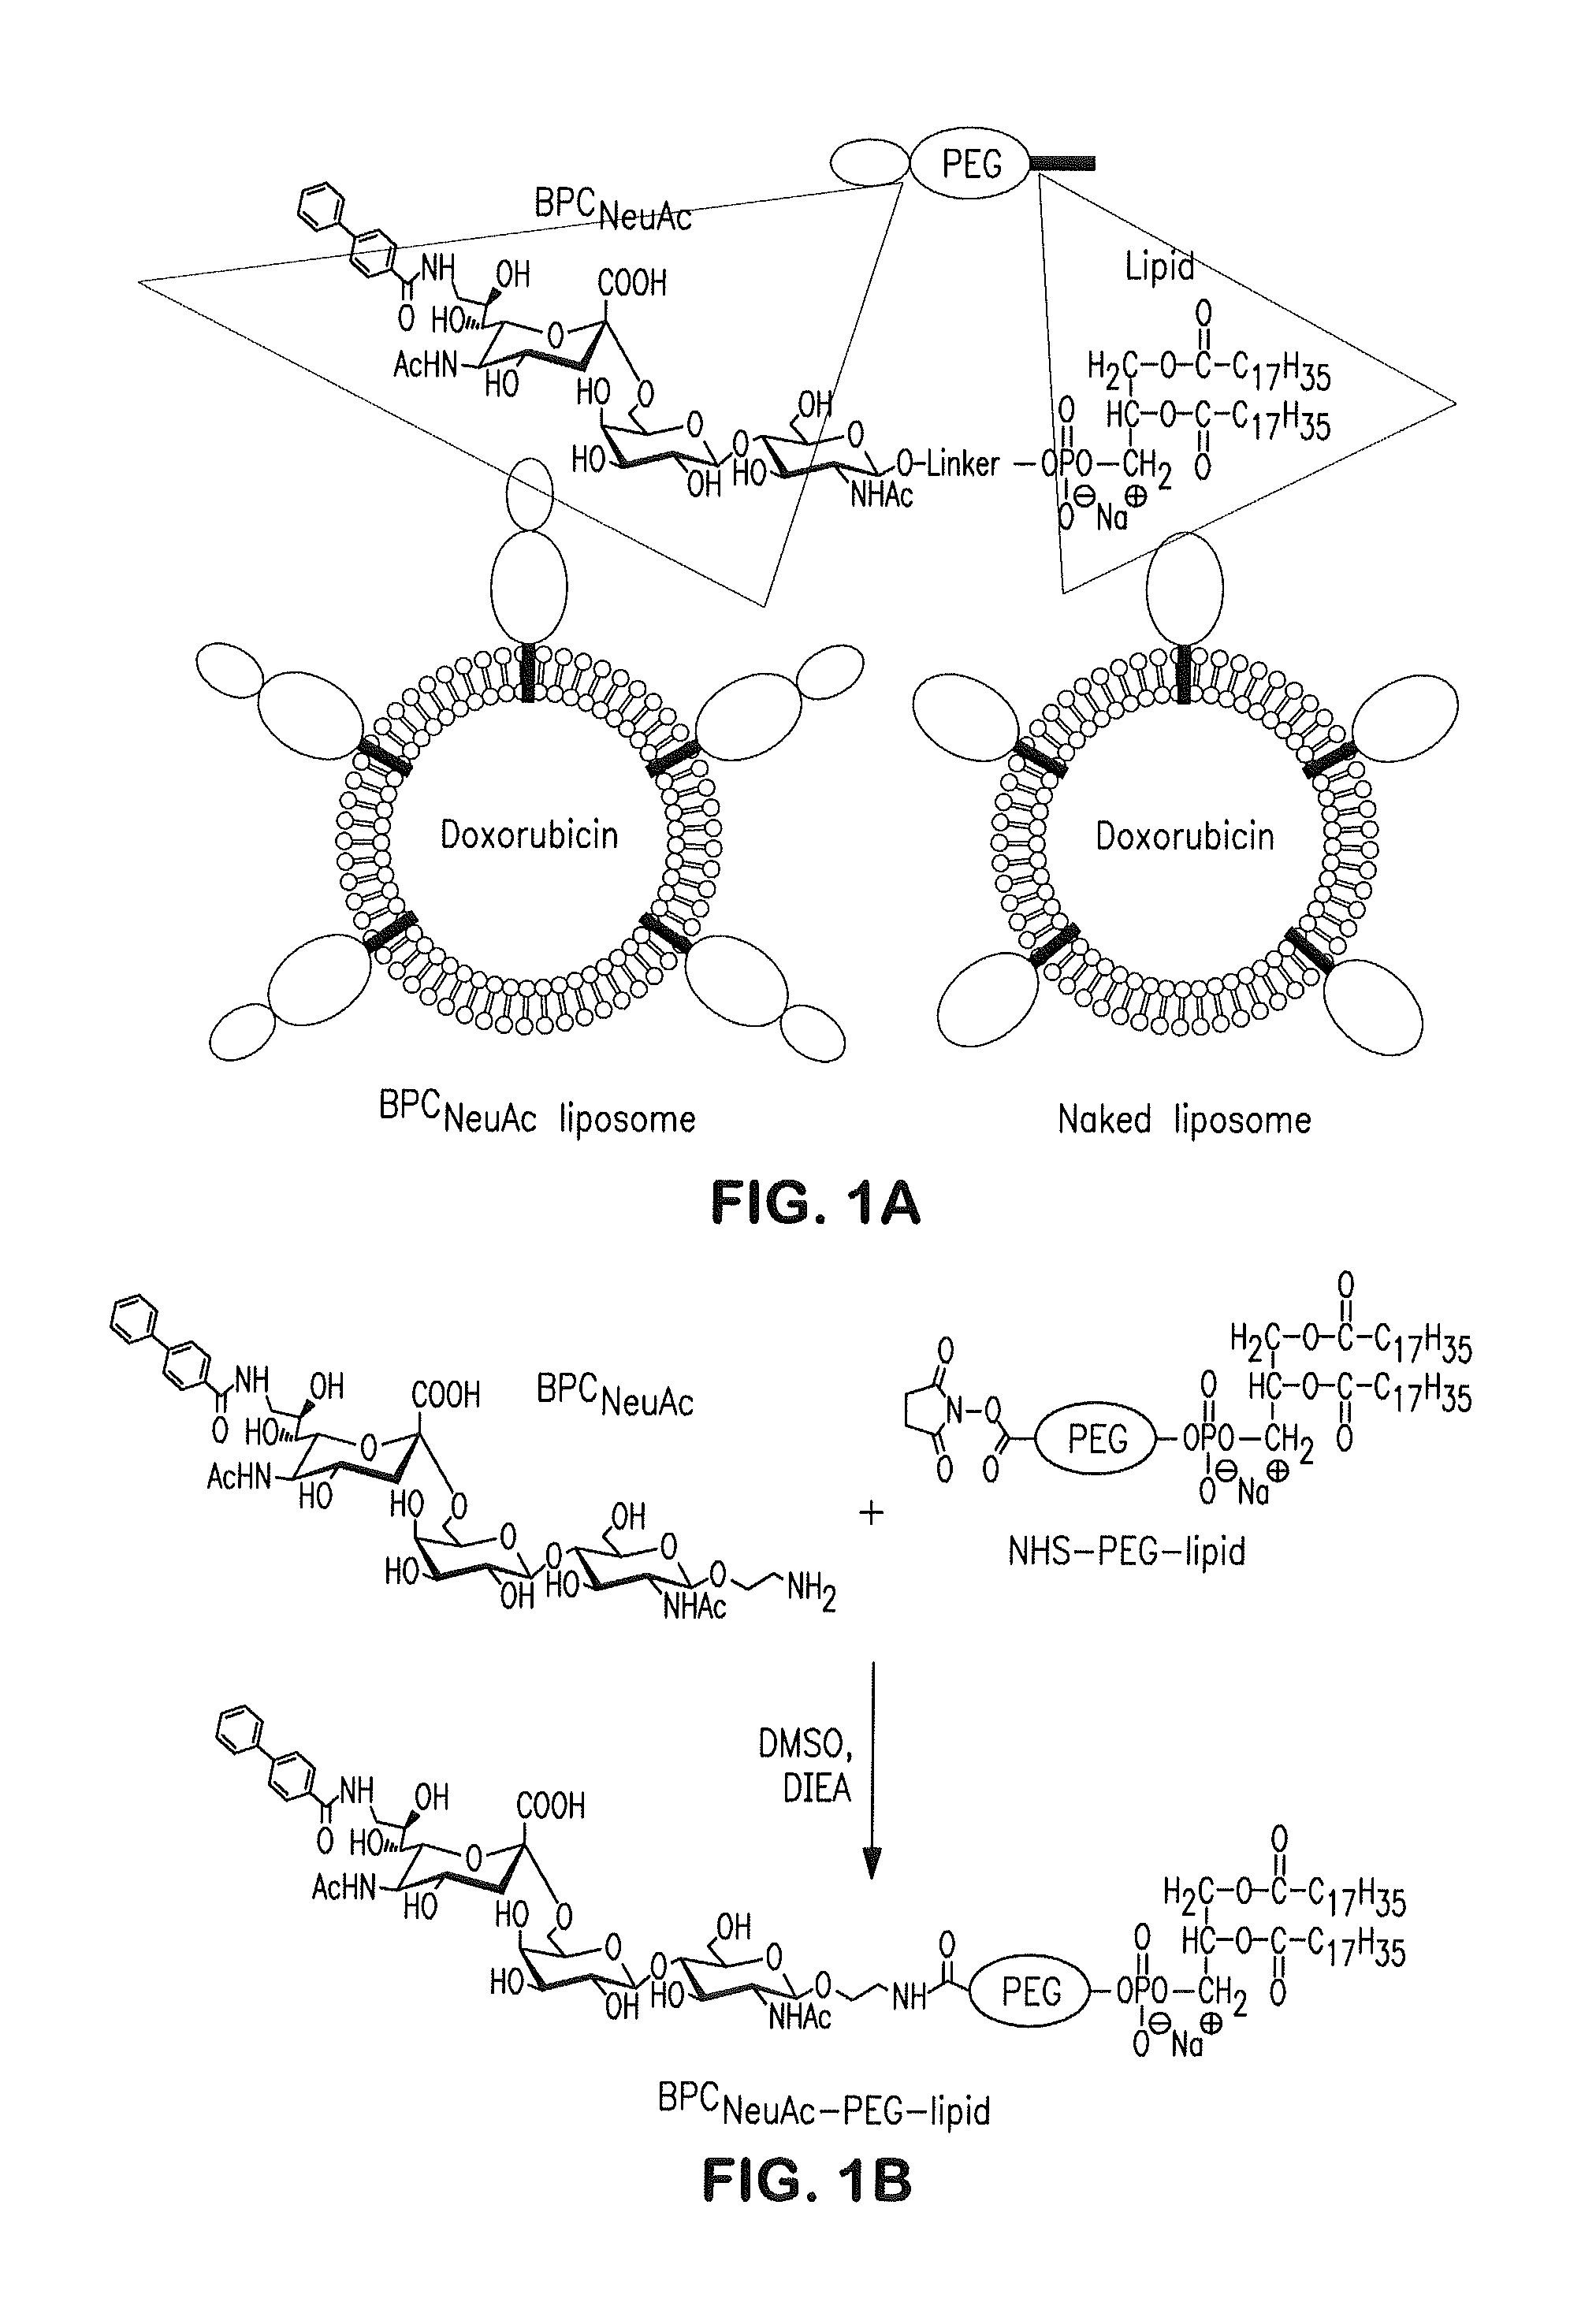 Liposome targeting compounds and related uses